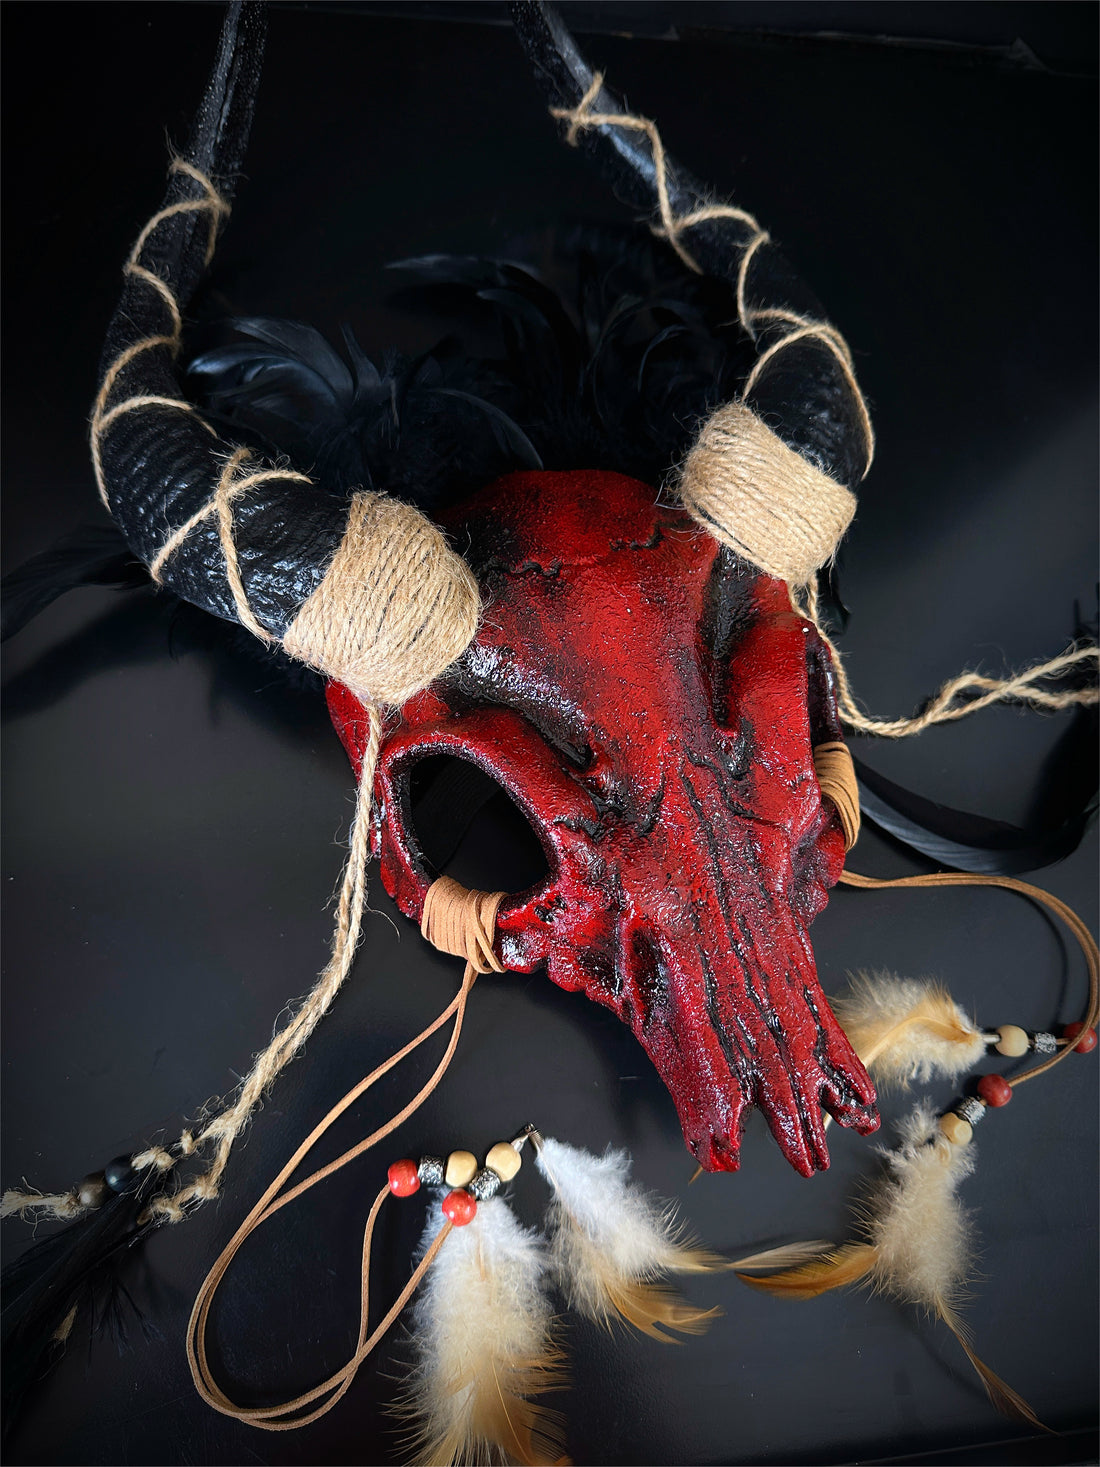 Ram skull horn headdress in blood red with black feathers.